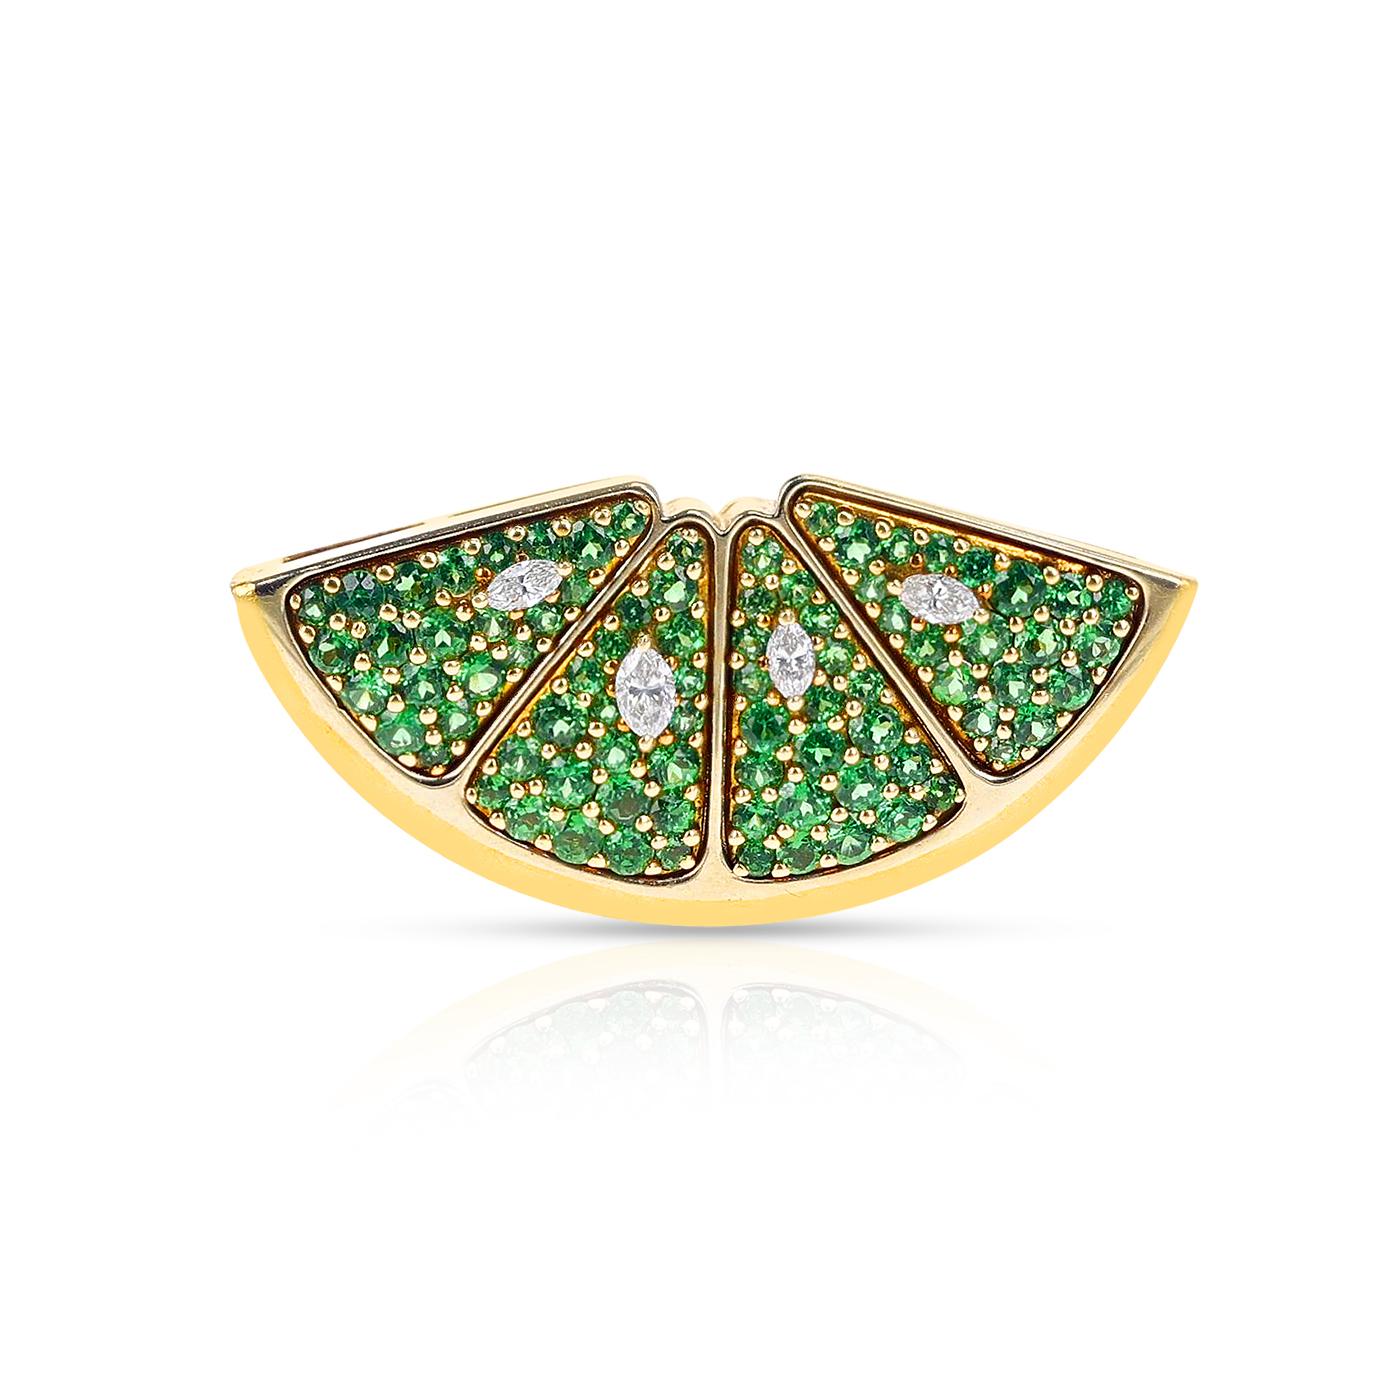 Marquise Cut Mark Patterson Tsavorite Garnet and Diamond Lime Wedge Brooch, 18k and 24k  For Sale